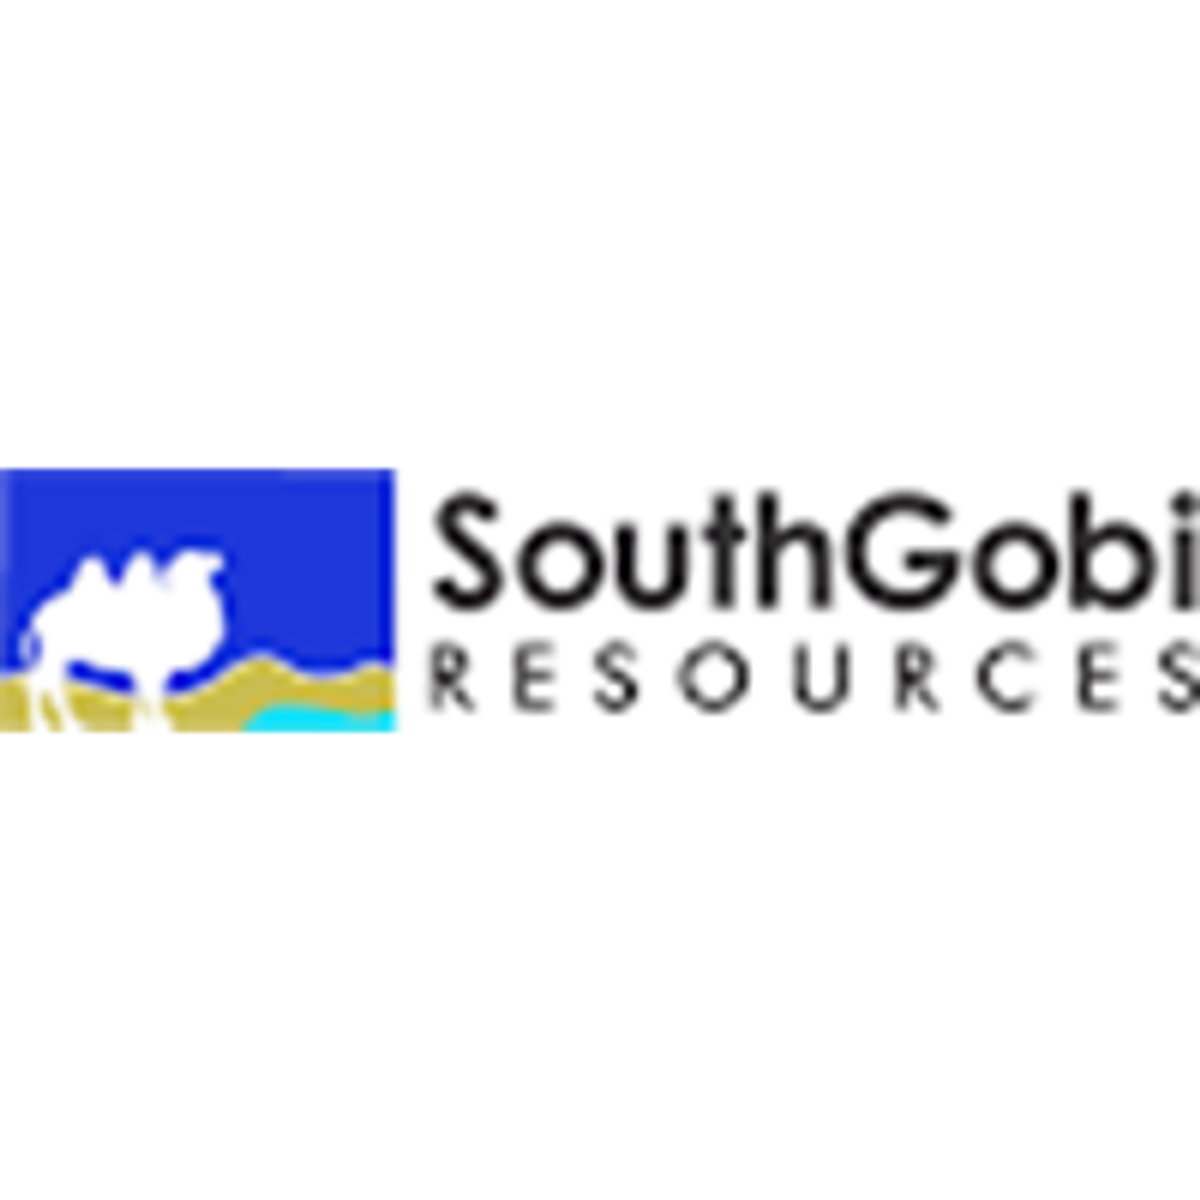 SouthGobi Announces Appointment Of Executive Directors; Change Of Composition Of Board Committee; Changes In Senior Management